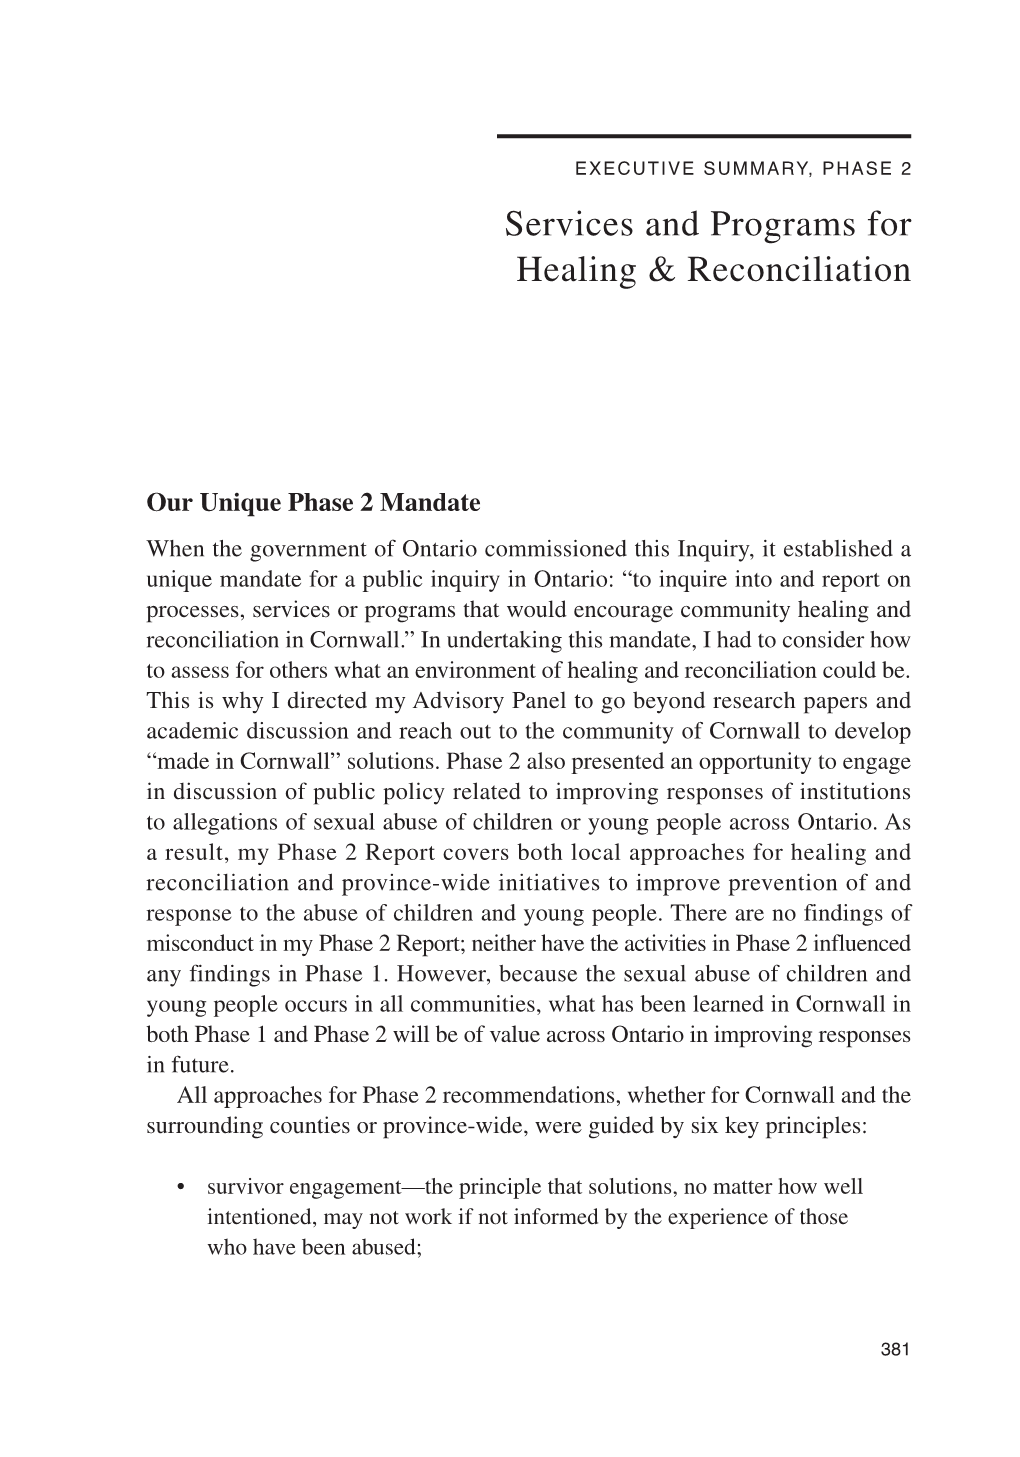 PHASE 2 Services and Programs for Healing & Reconciliation